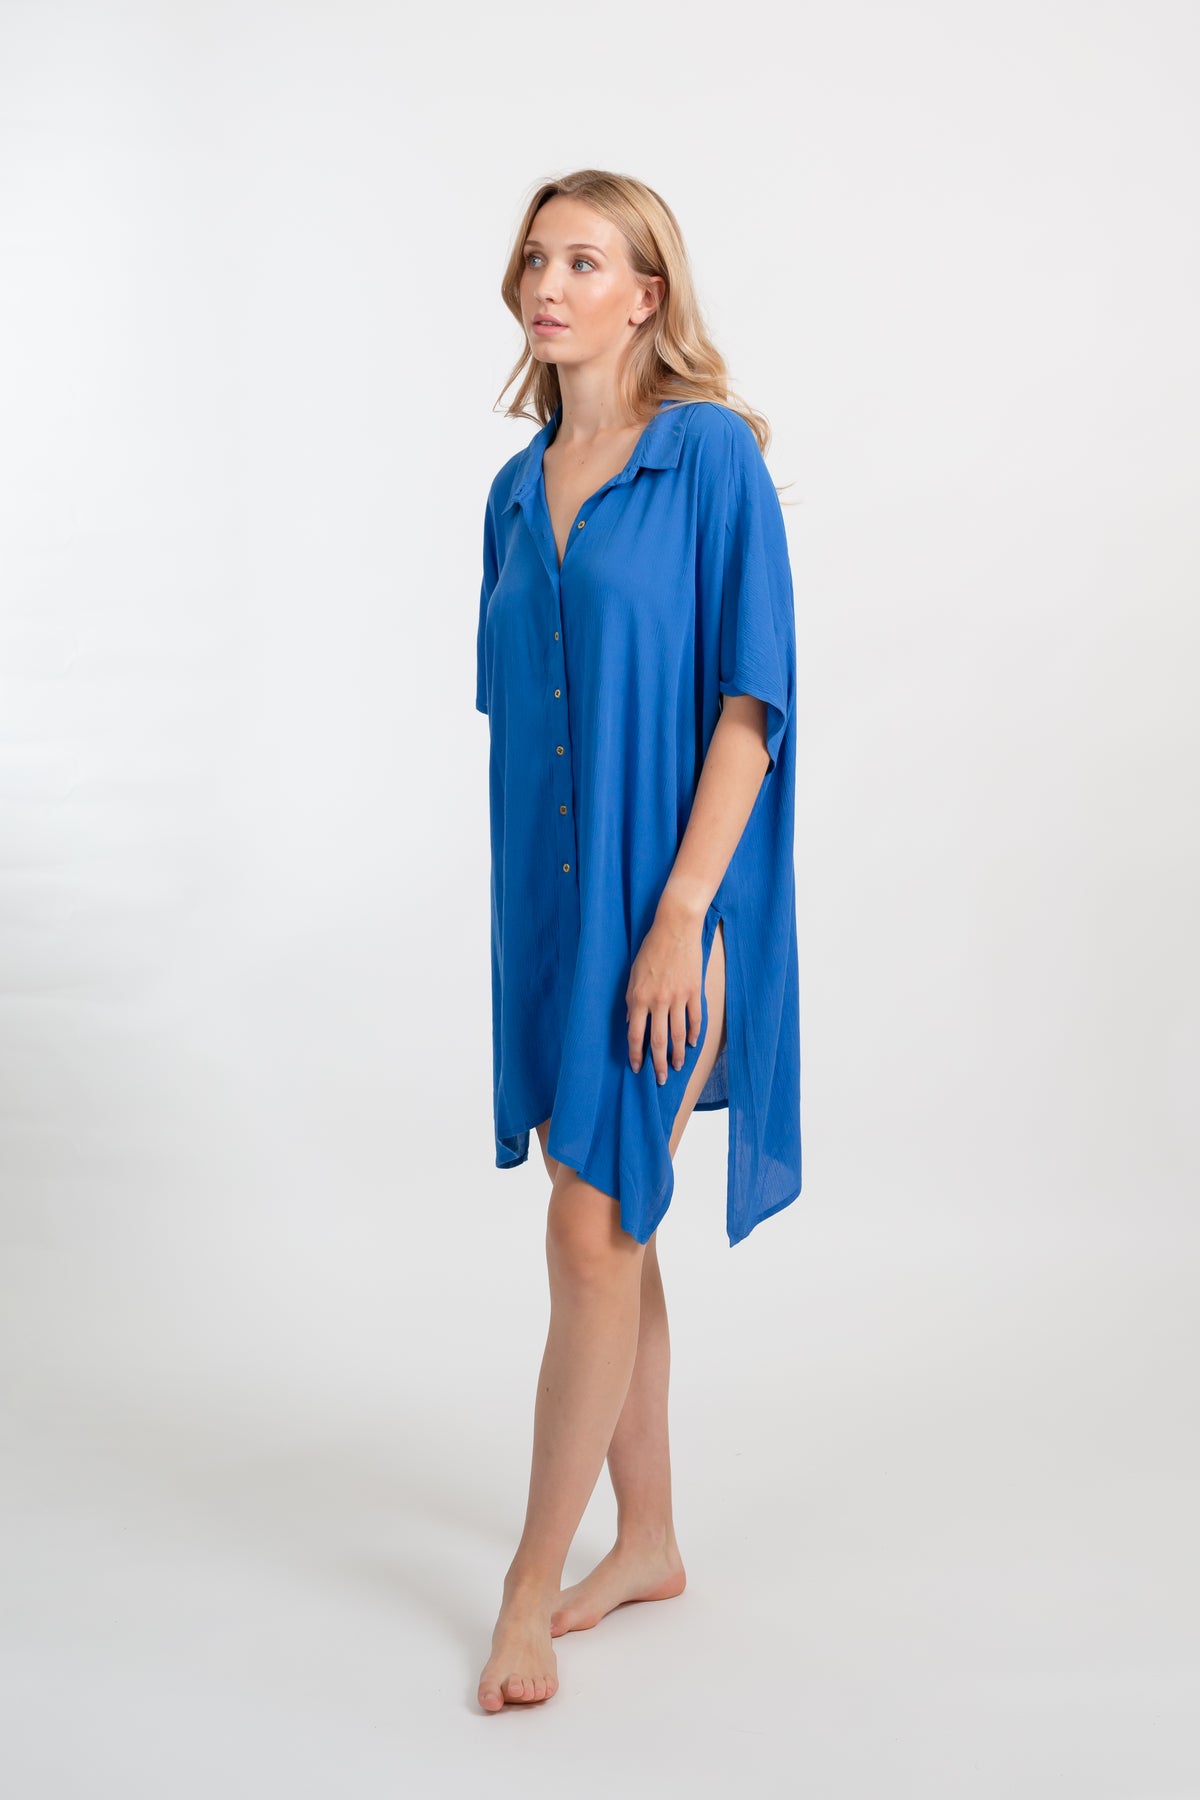 A blonde Caucasian model wearing a blue big shirt bathing suit cover up shirt dress, standing in a studio smiling.